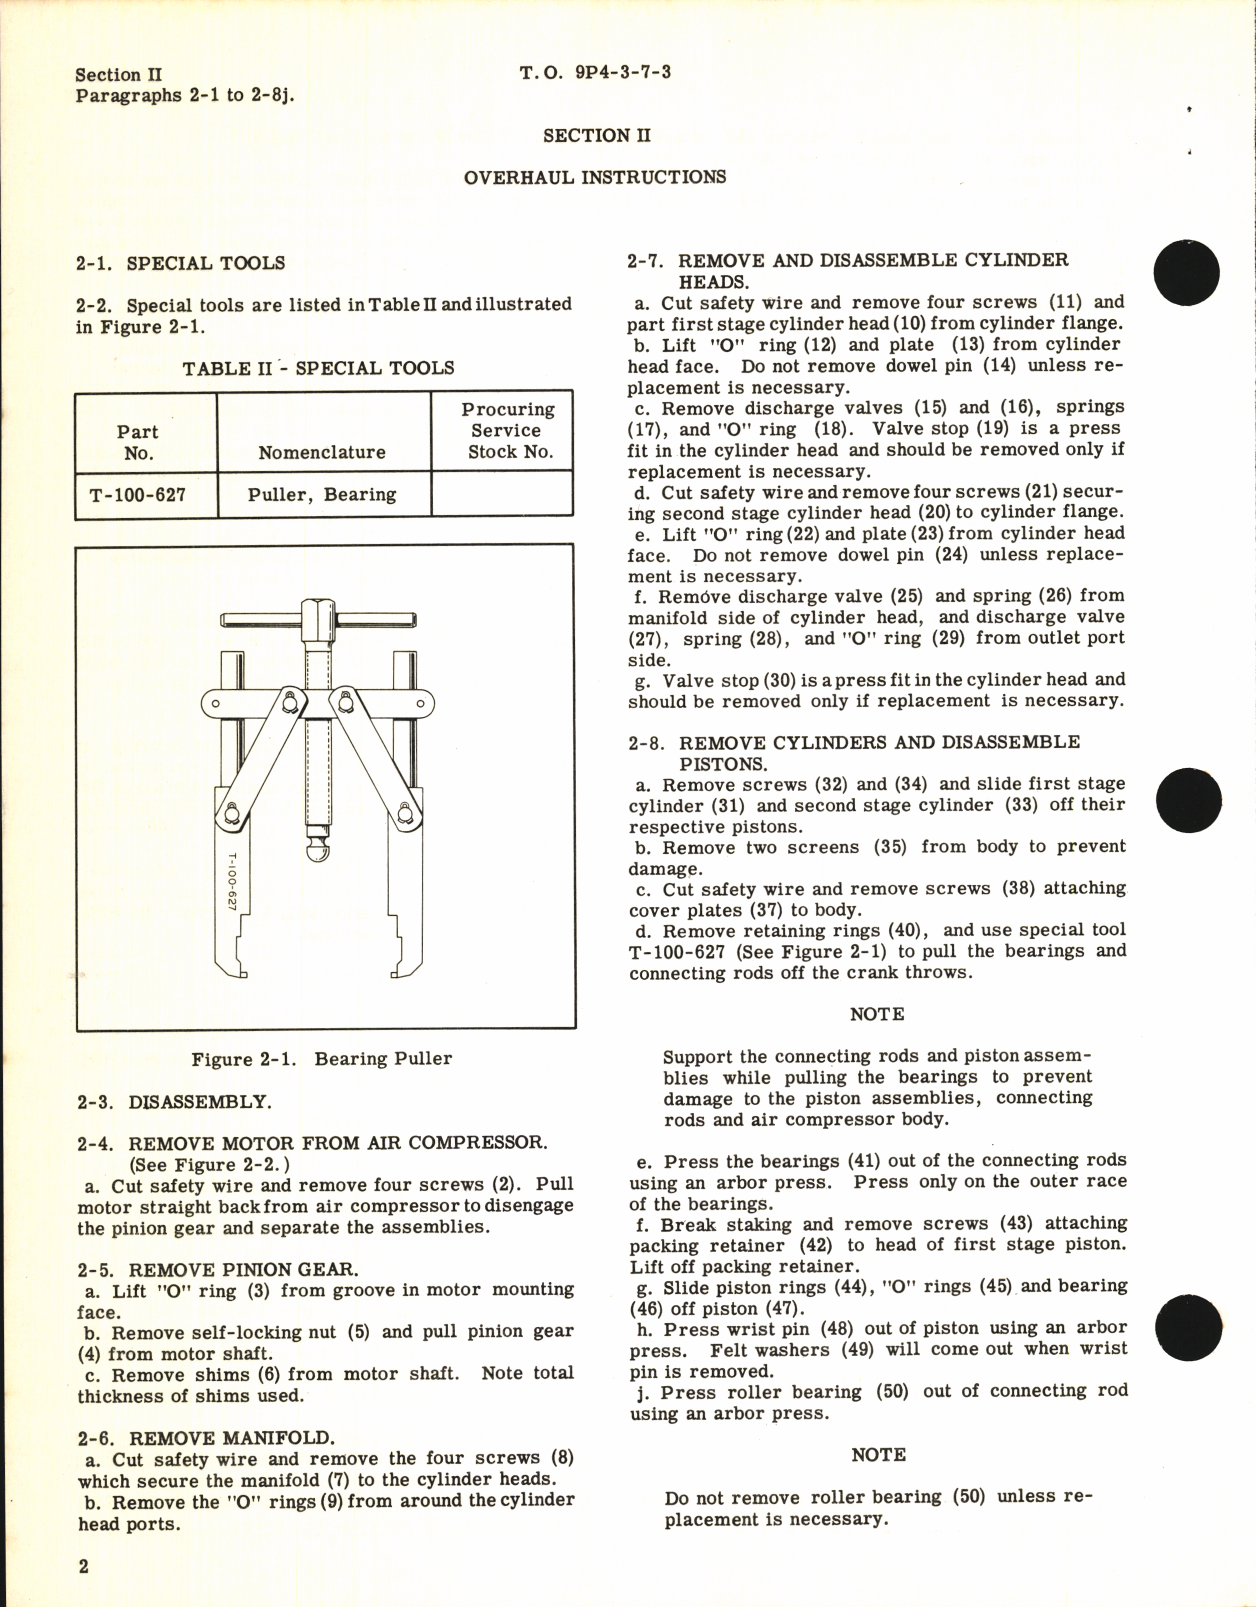 Sample page 6 from AirCorps Library document: Handbook of Instructions for Air Compressor Model 100-627-2